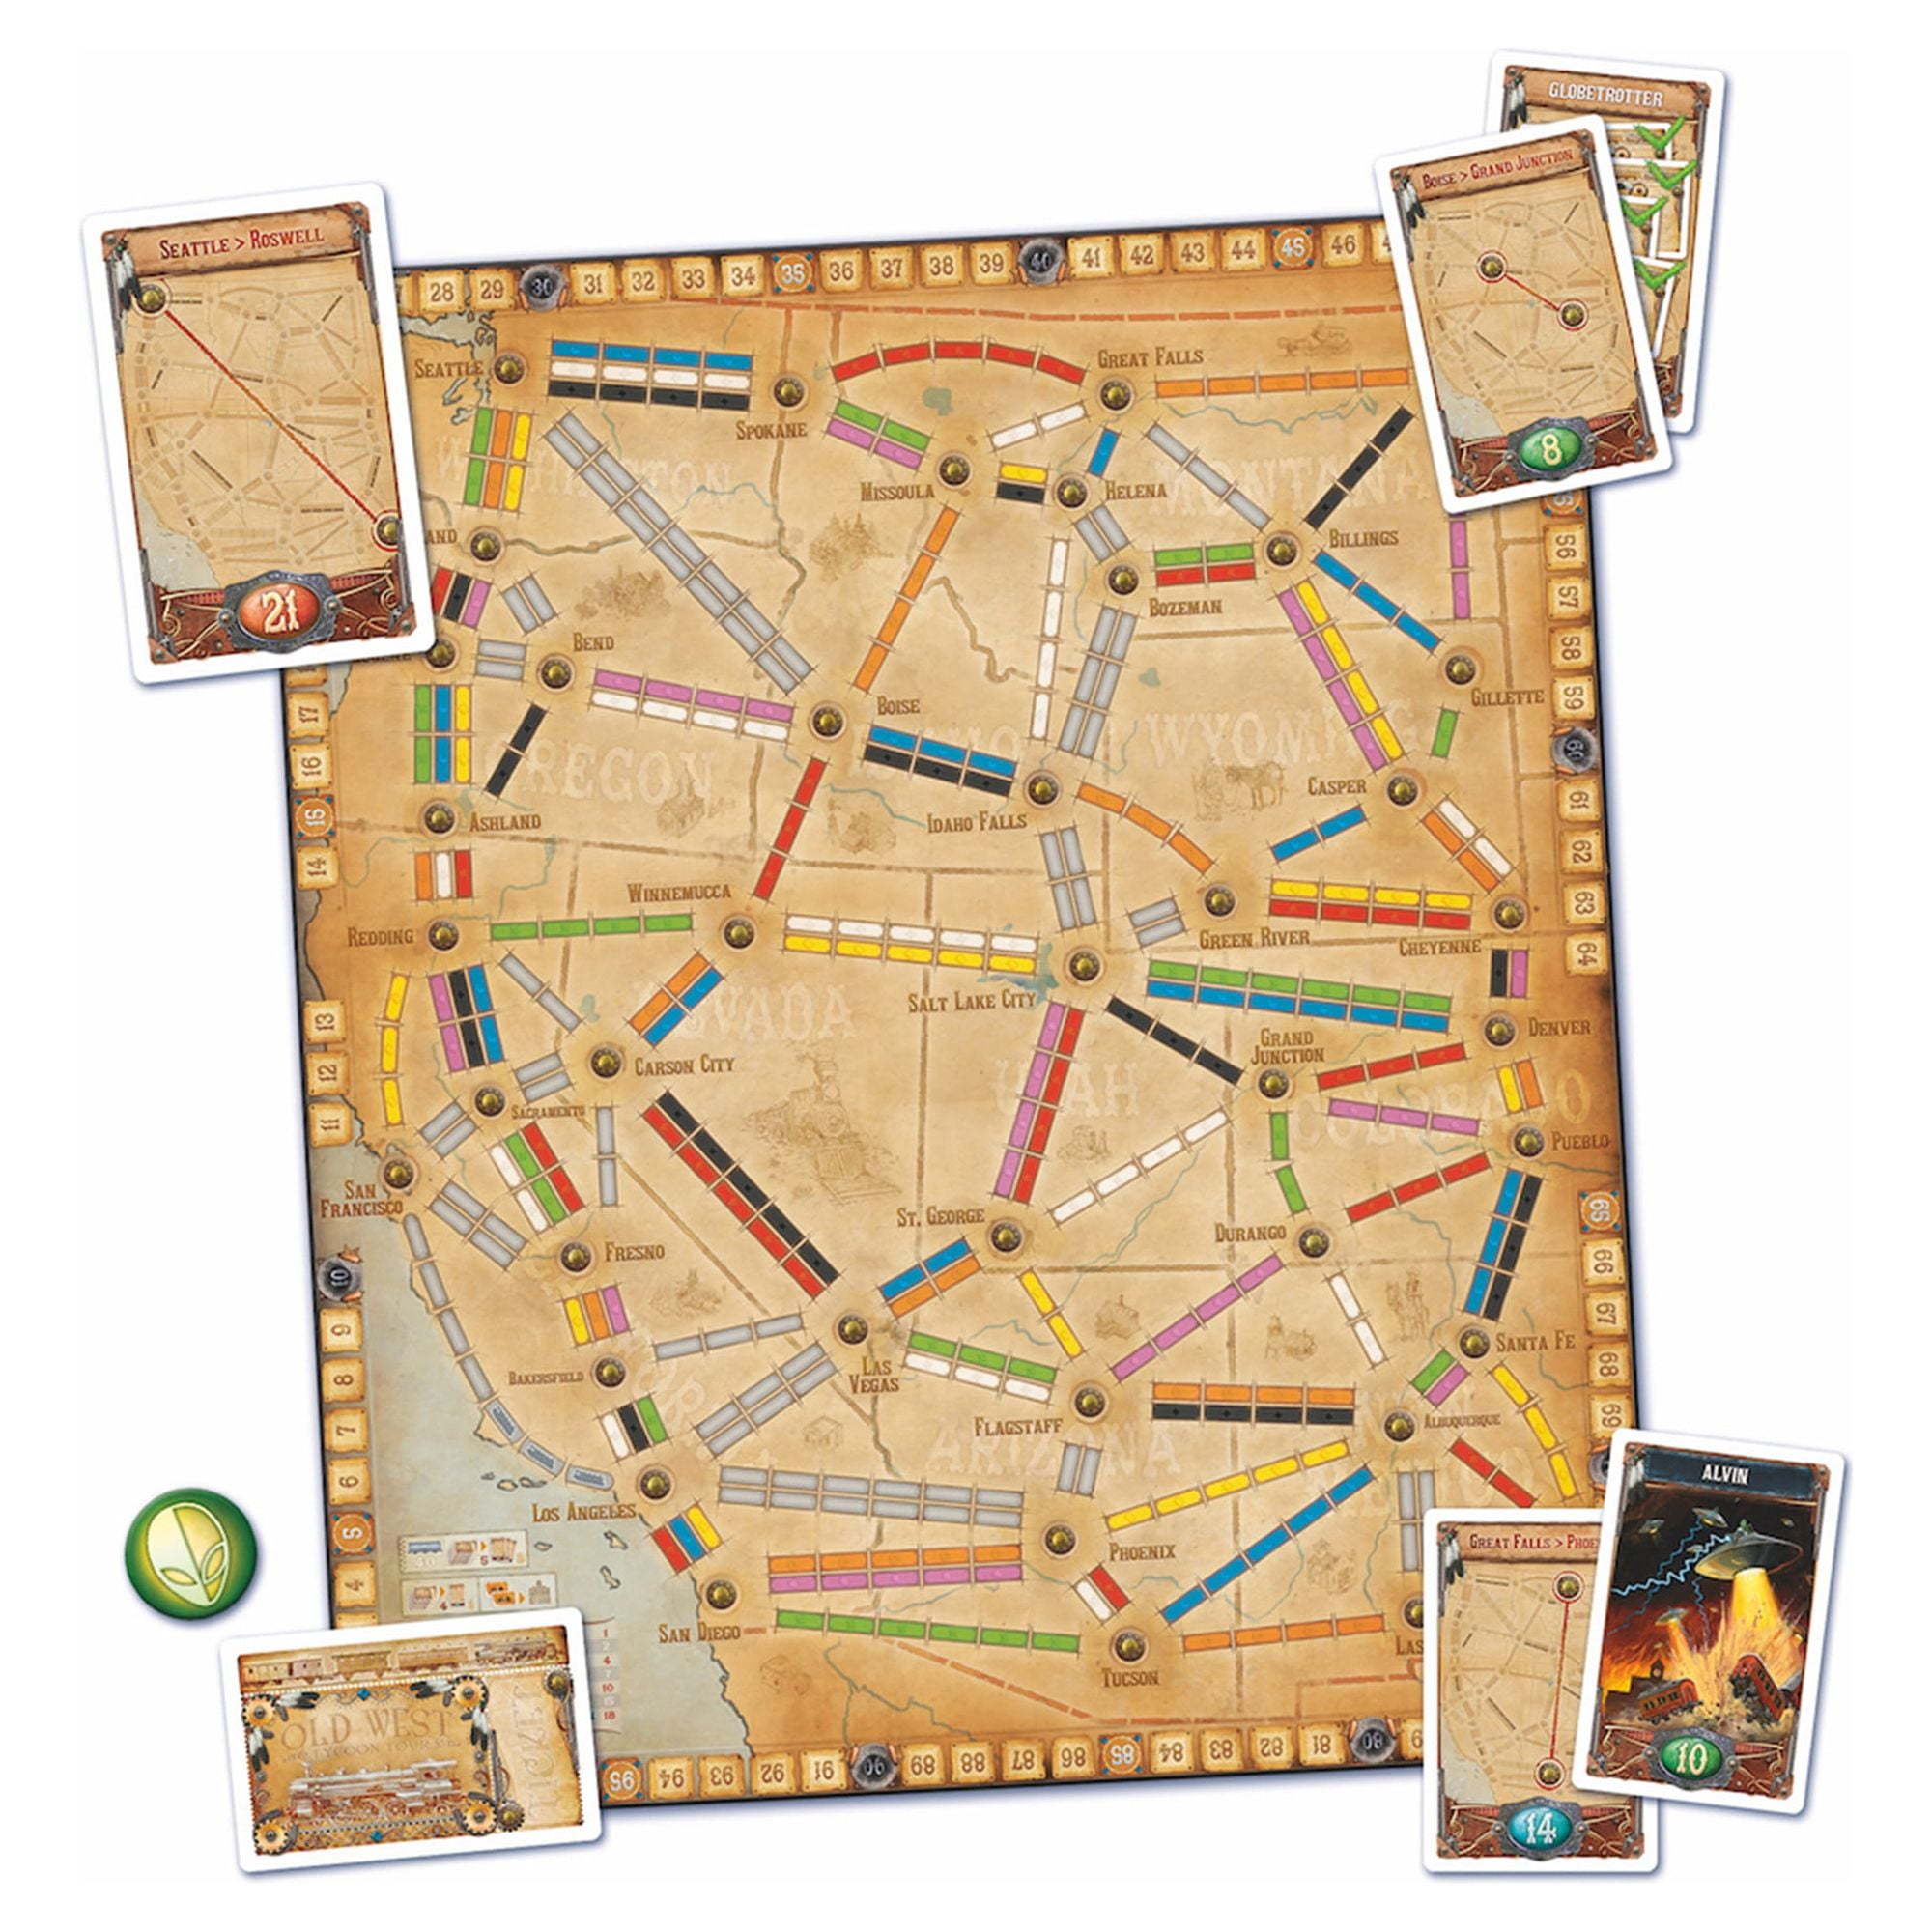  Ticket to Ride France + Old West Board Game EXPANSION, Train  Route Strategy Game, Fun Family Game for Kids and Adults, Ages 8+, 2-6  Players